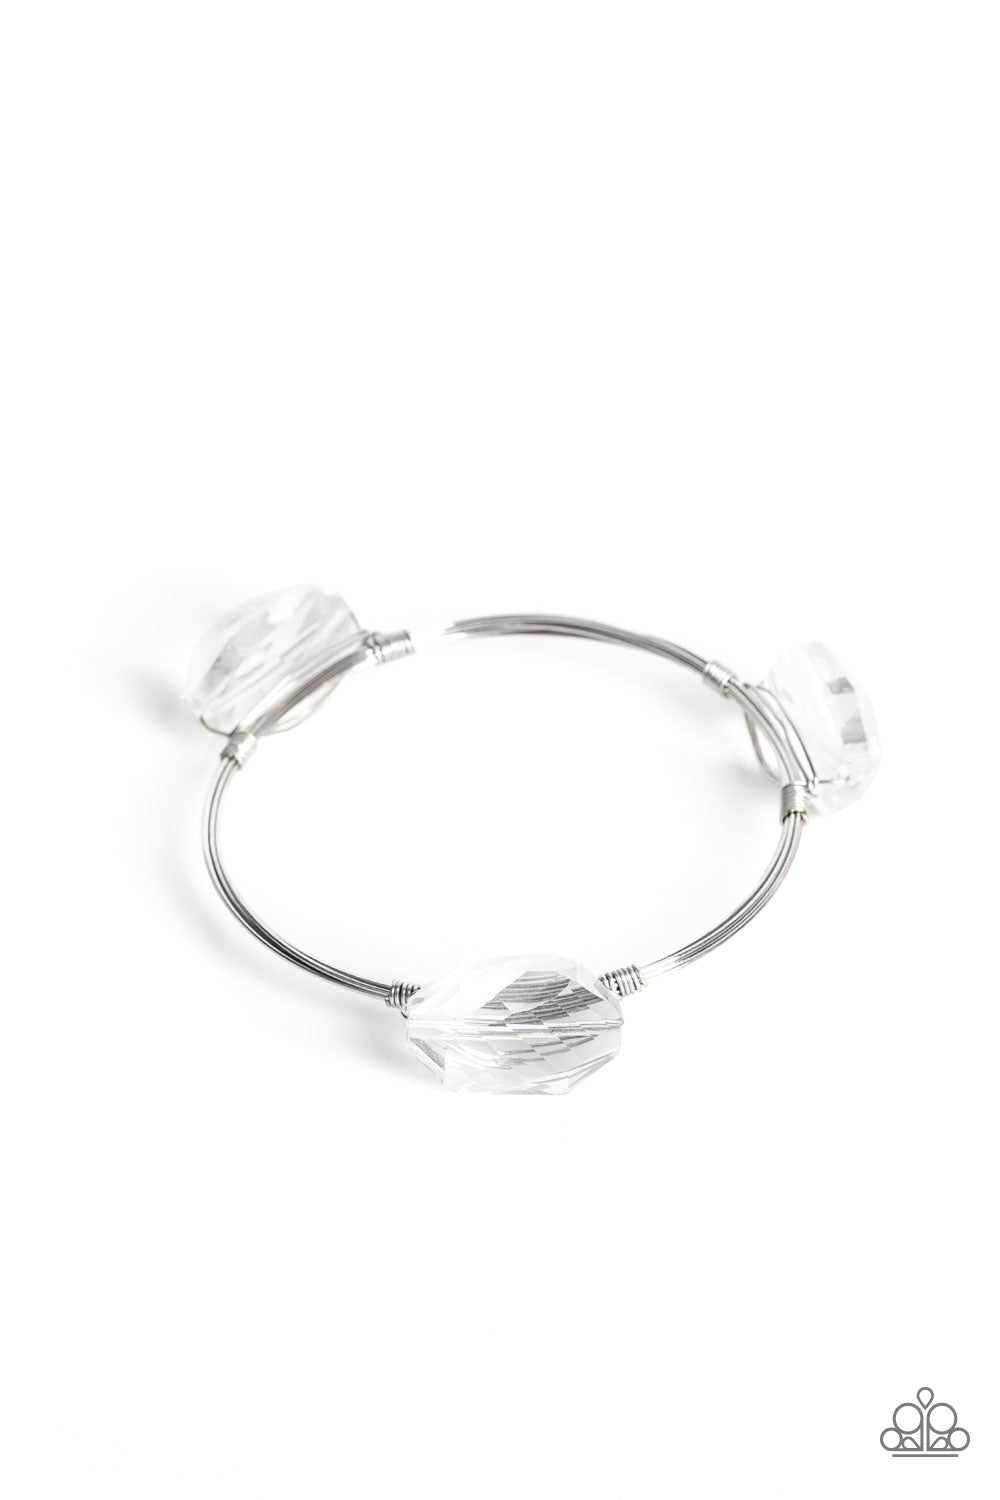 glassy shimmer, oversized faceted gems are wrapped in place along the front of coiled silver wires that join into a solitaire bangle around the wrist